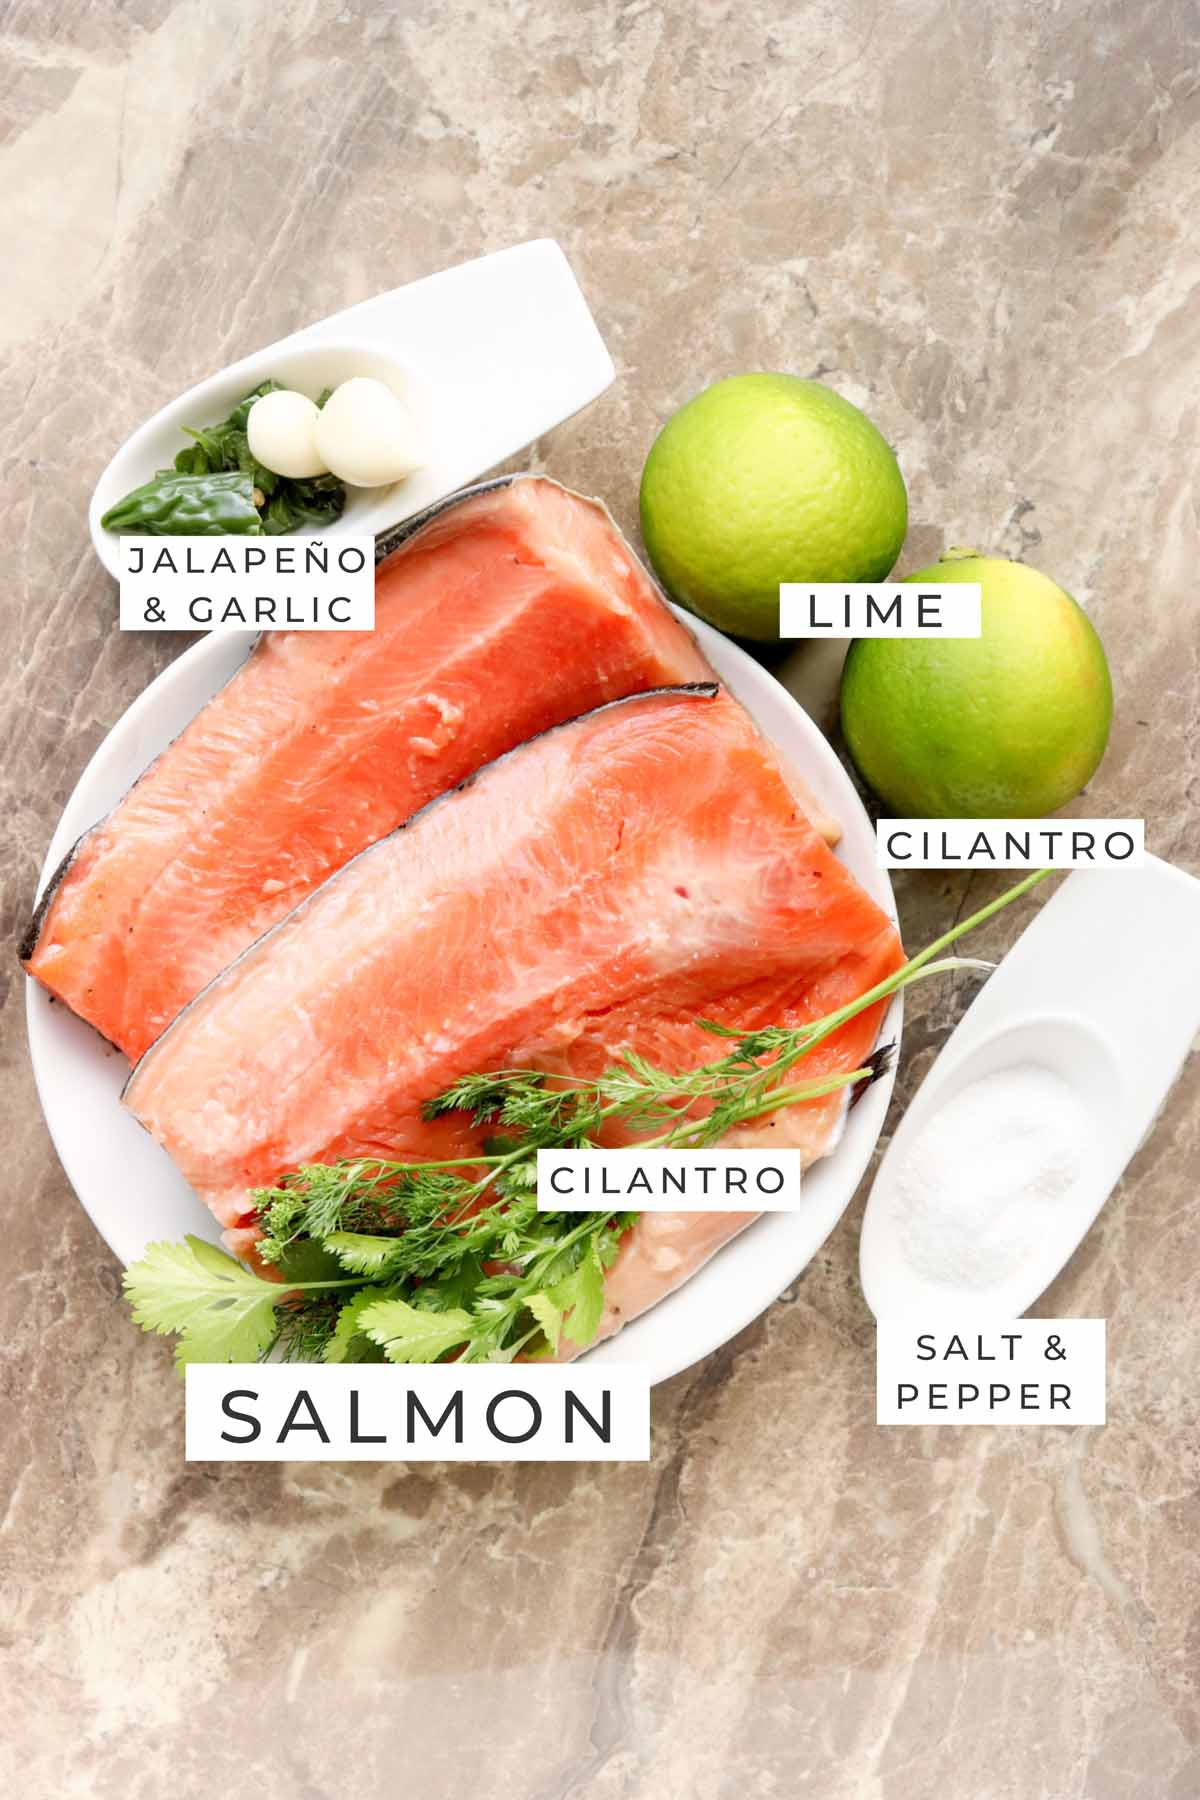 Labeled ingredients for the salmon.